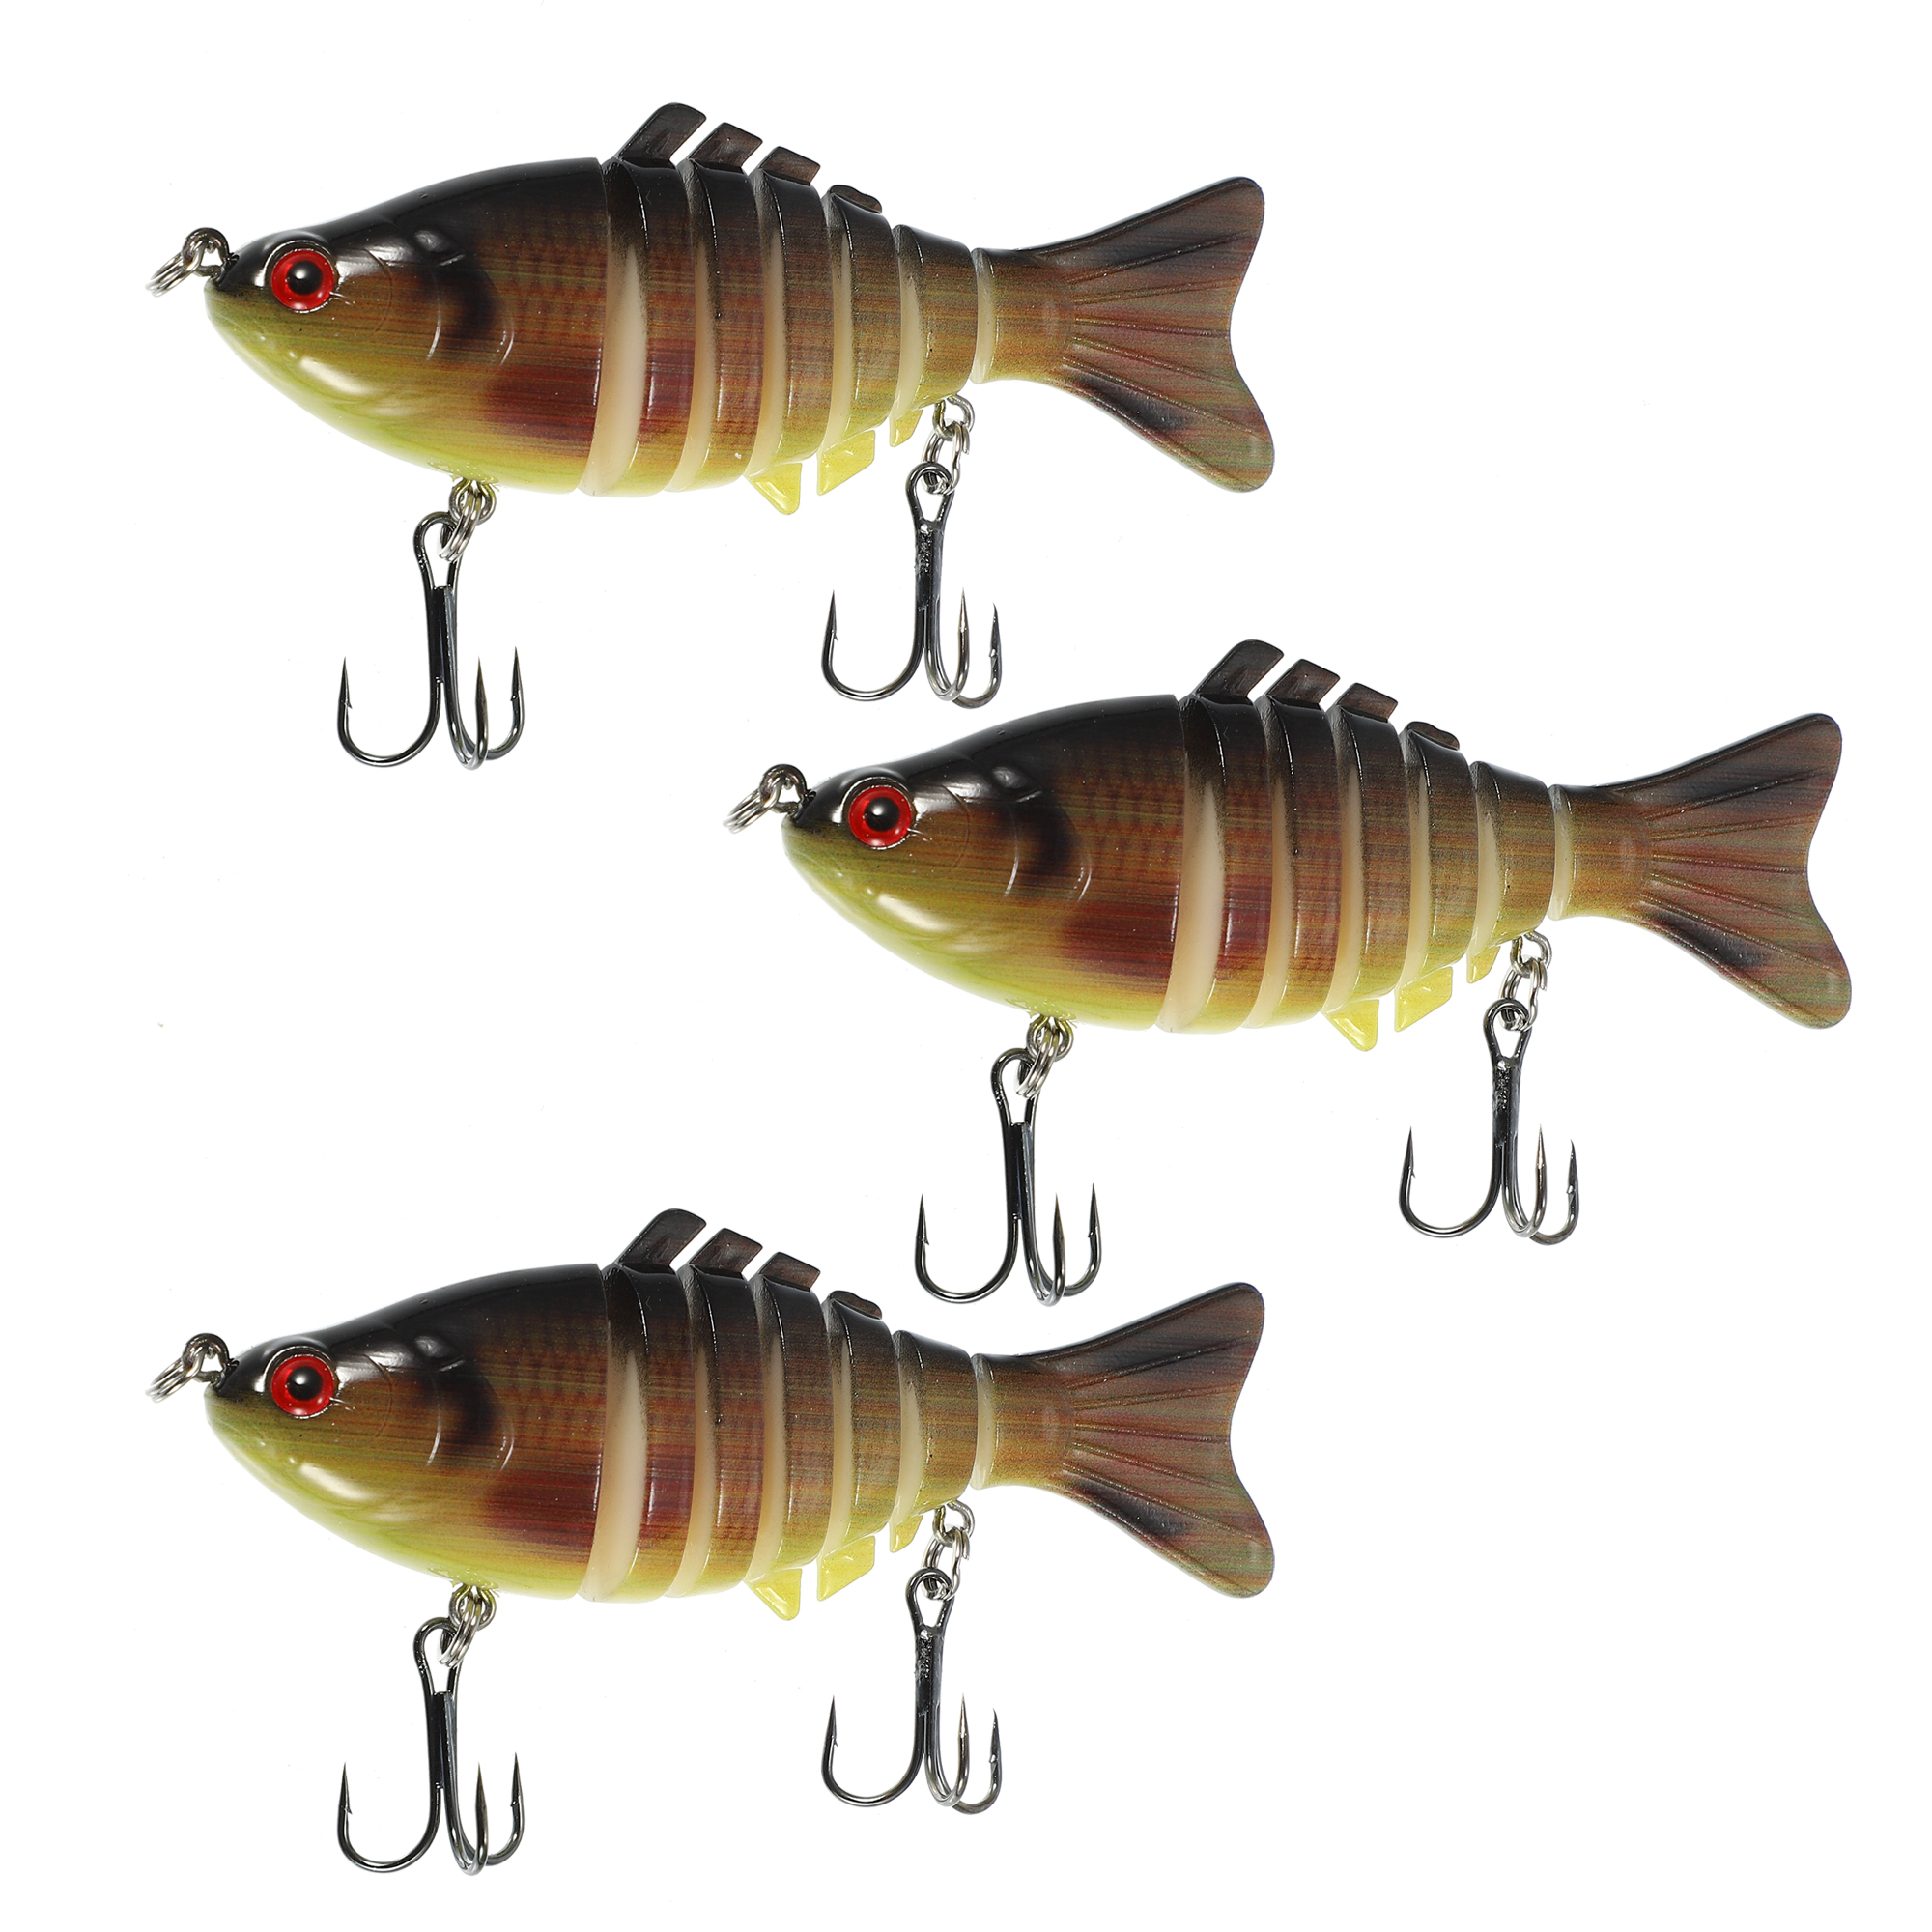 Unique Bargains 3 Pcs Fishing Lures Jerk Baits for Bass Fishing Freshwater  ABS Brown 0.03lb